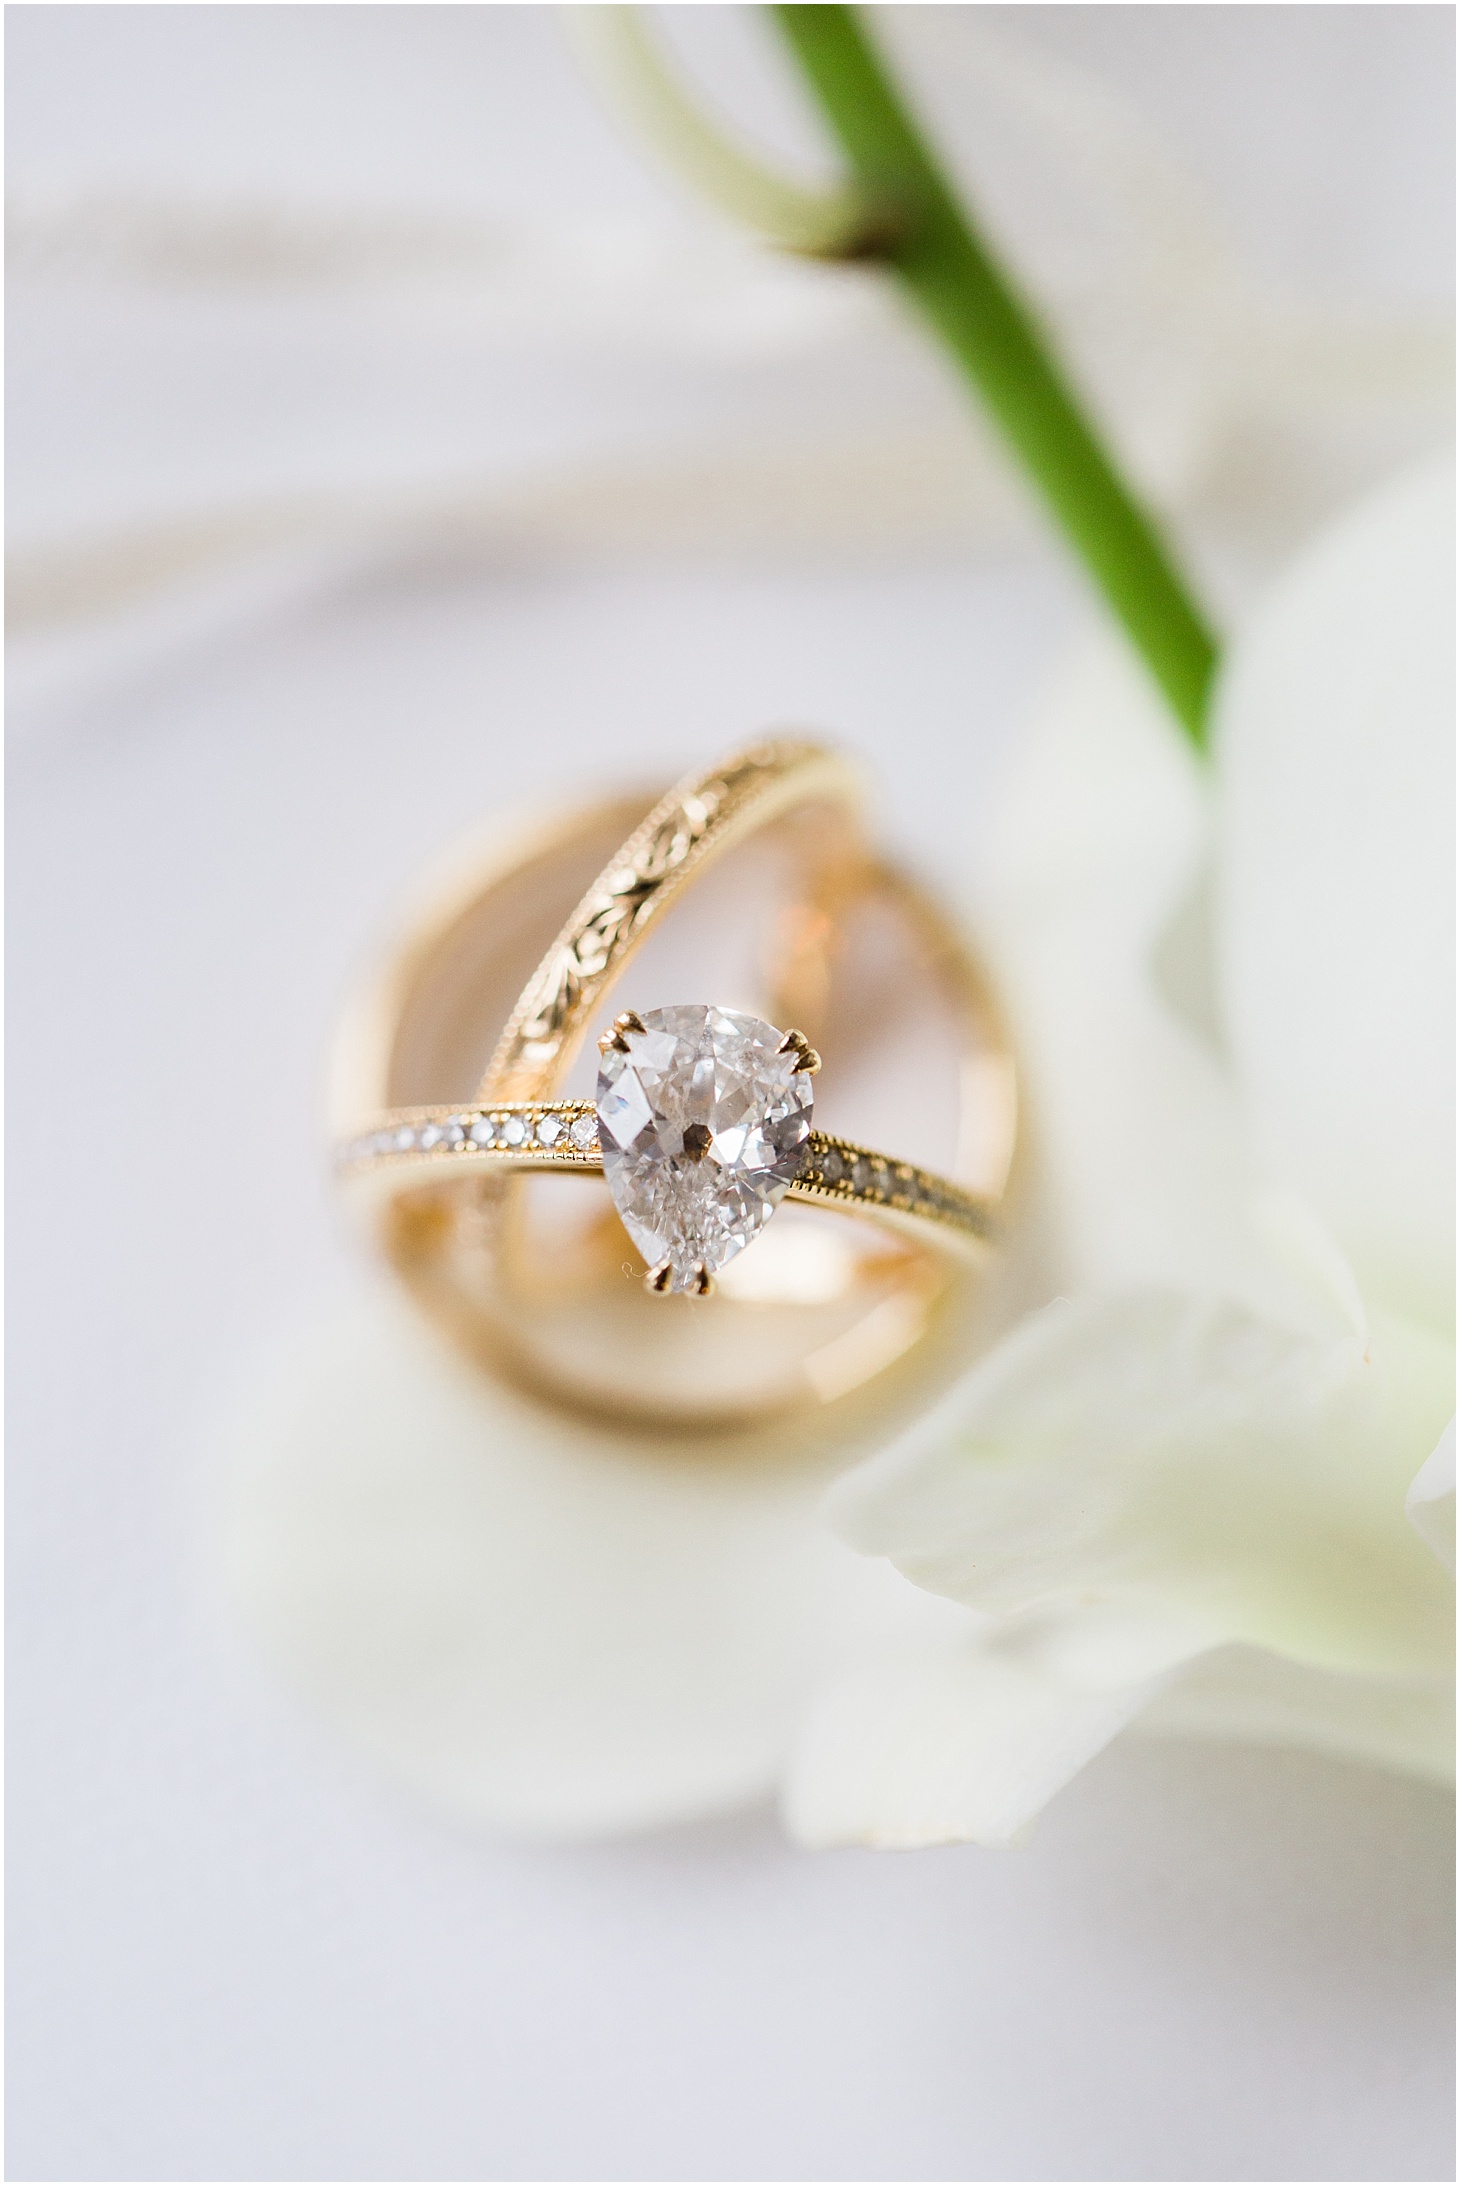 Market Street Diamonds Engagement Ring and Wedding Bands, Black Tie Hay-Adams Wedding with Summer Florals, Ceremony at Capitol Hill Baptist Church, Sarah Bradshaw Photography, DC Wedding Photographer